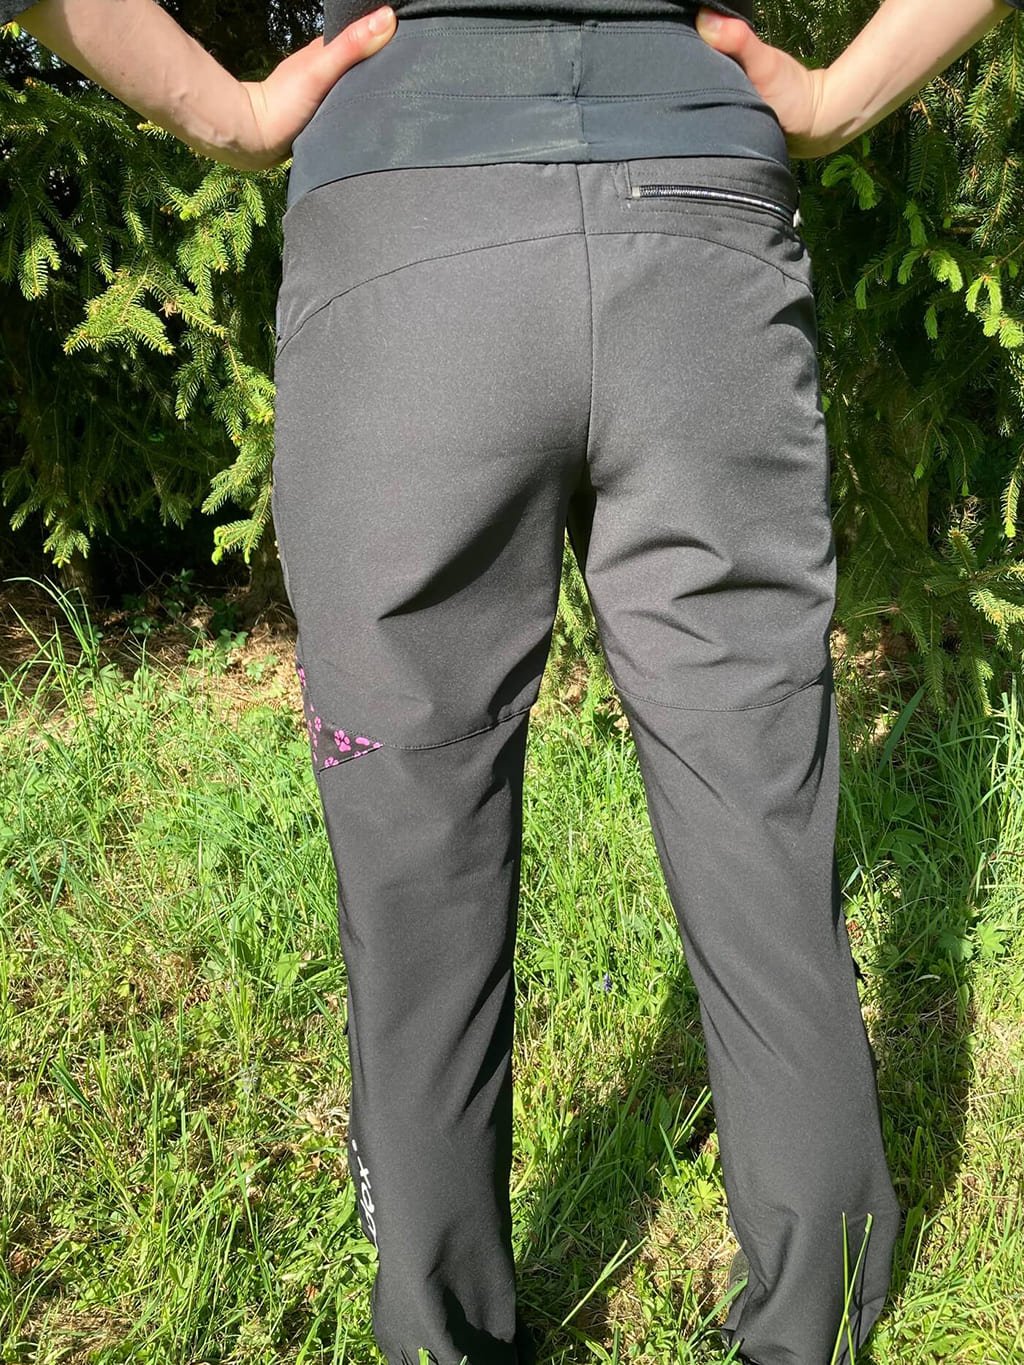 Women's training trousers SUMMER - black with lavender paws